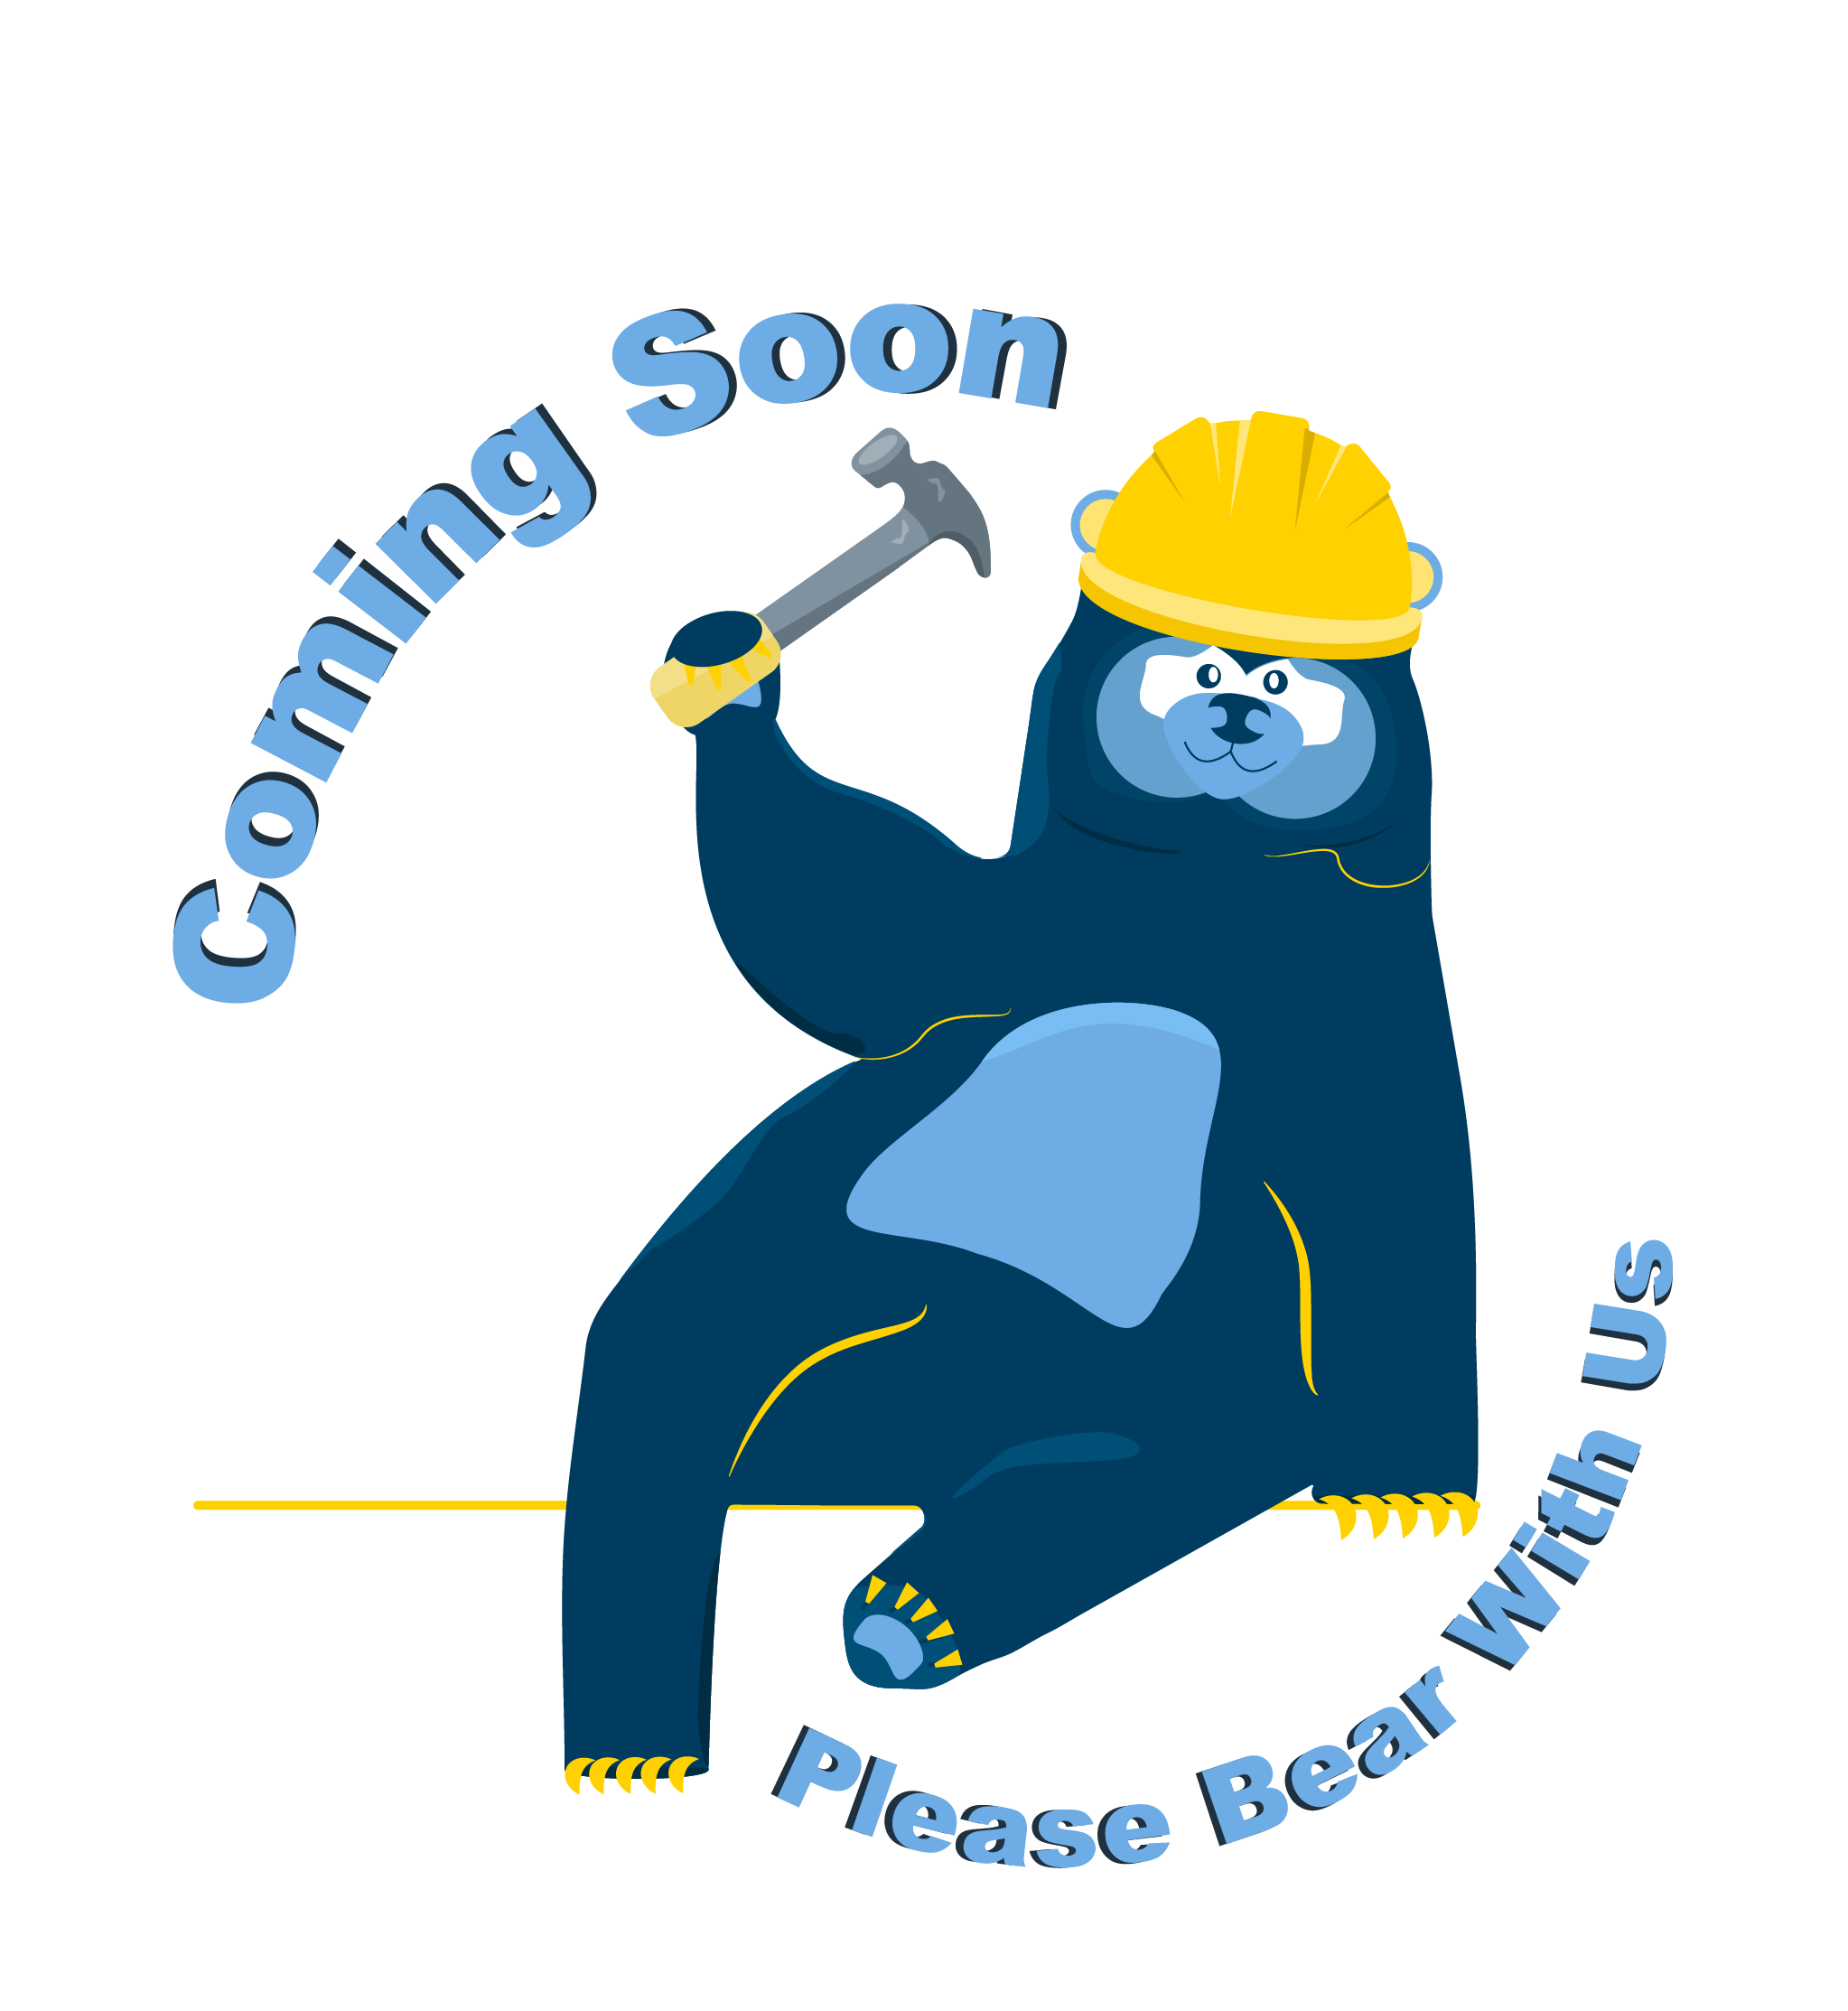 Bear wearing a hard hat and holding a hammer with the words "Coming Soon: Please bear with us" above and below it